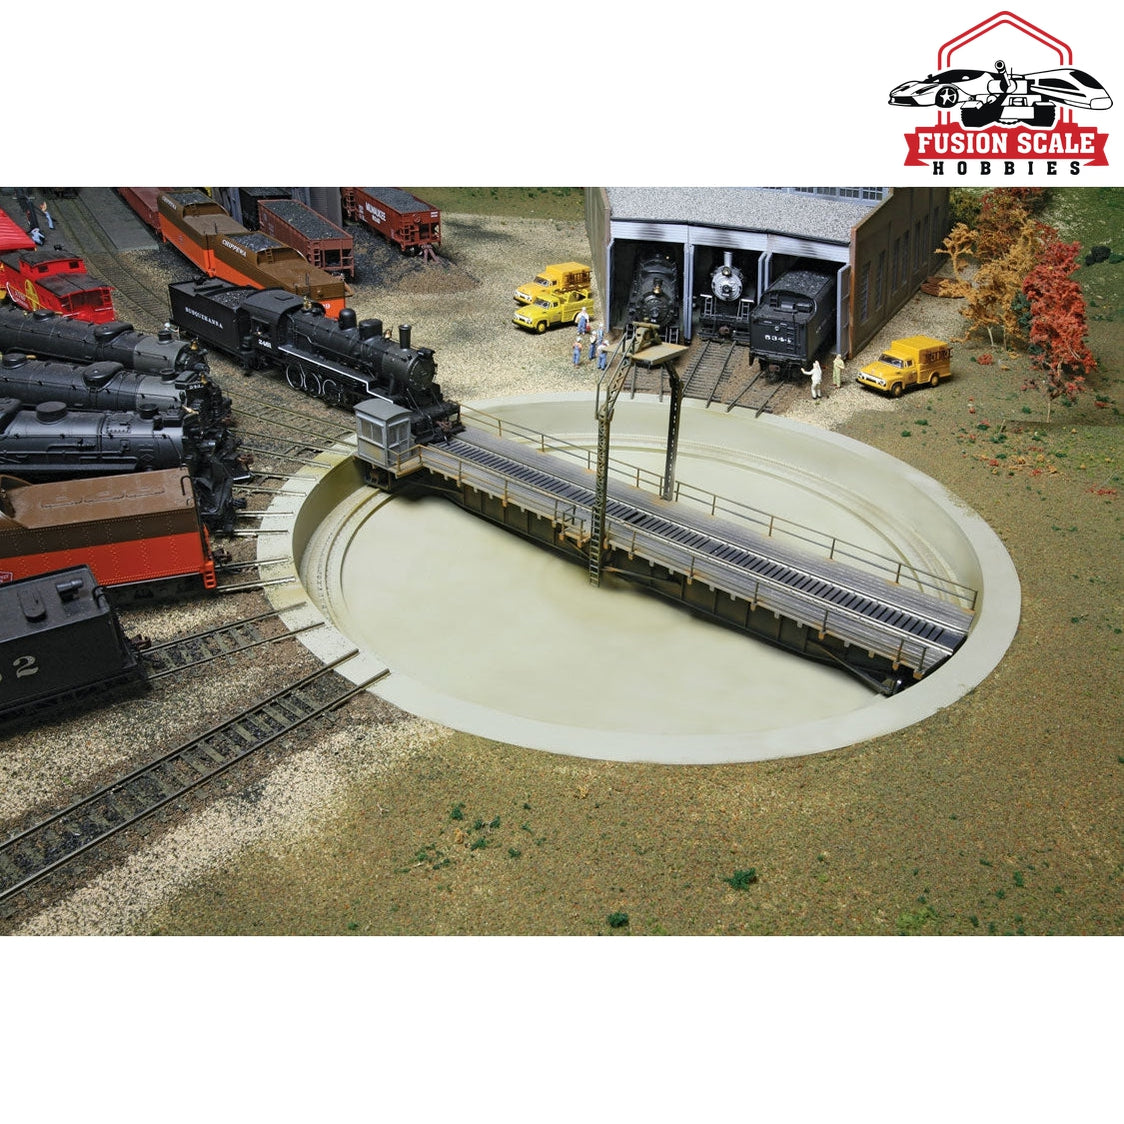 Walthers Cornerstone HO Scale Motorized 90' Turntable Assembled 133/4" 34.9cm Overall Diameter